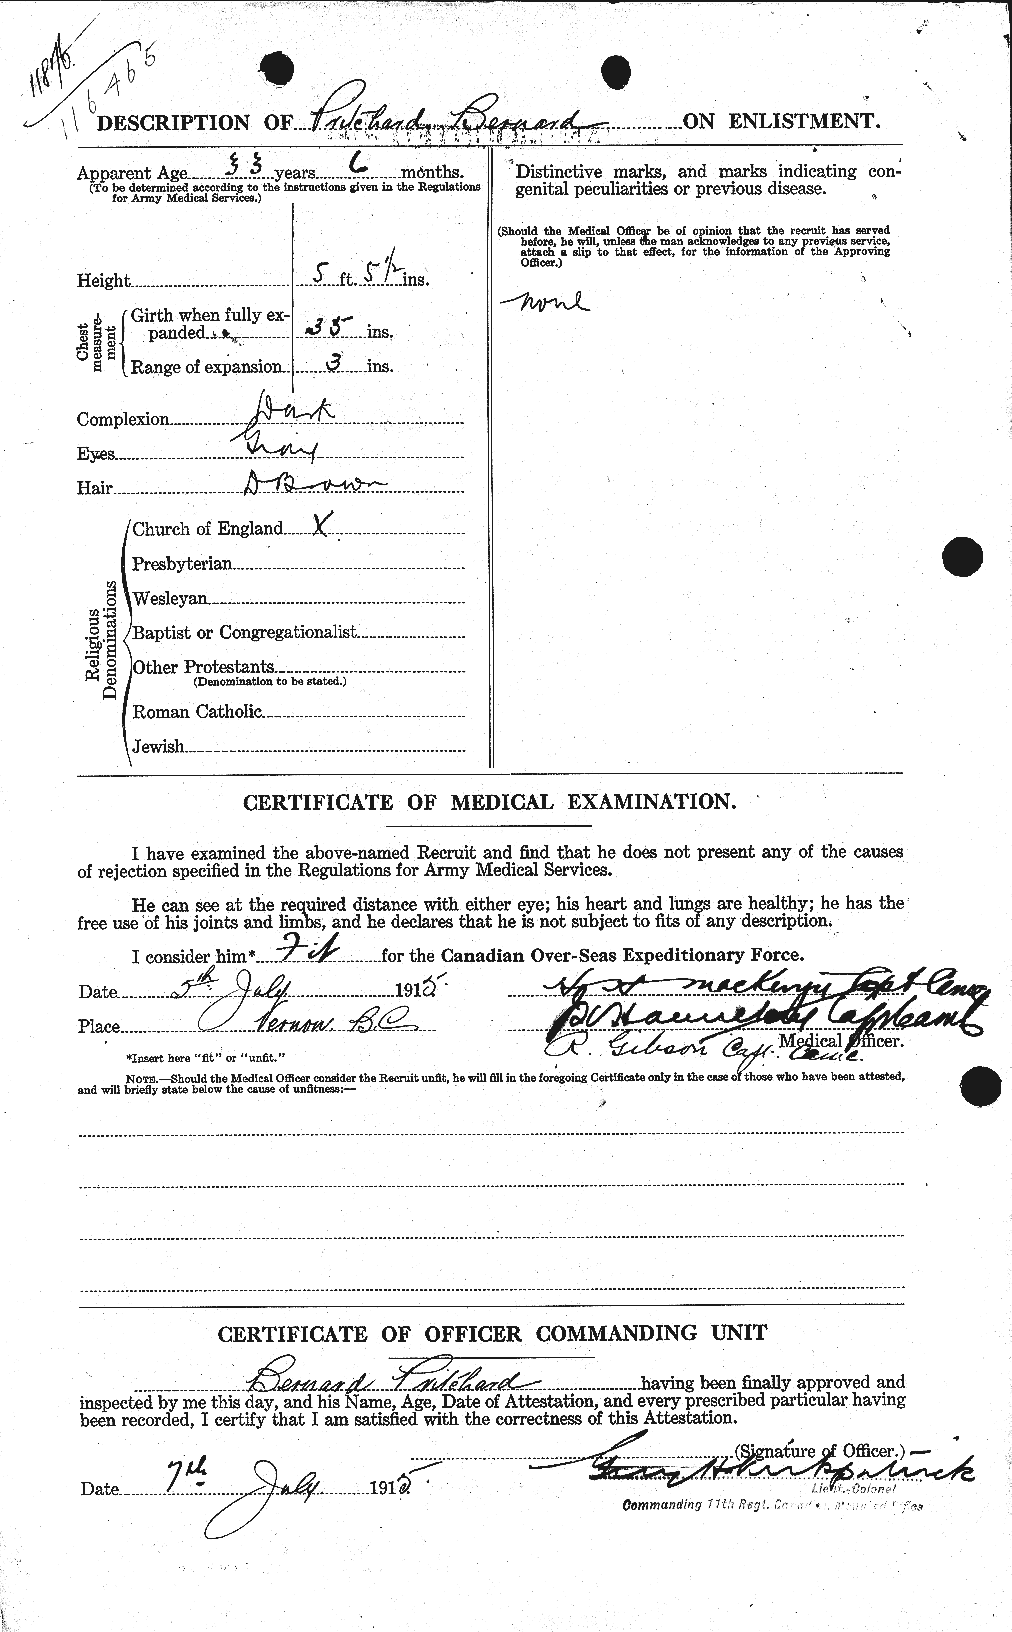 Personnel Records of the First World War - CEF 588489b